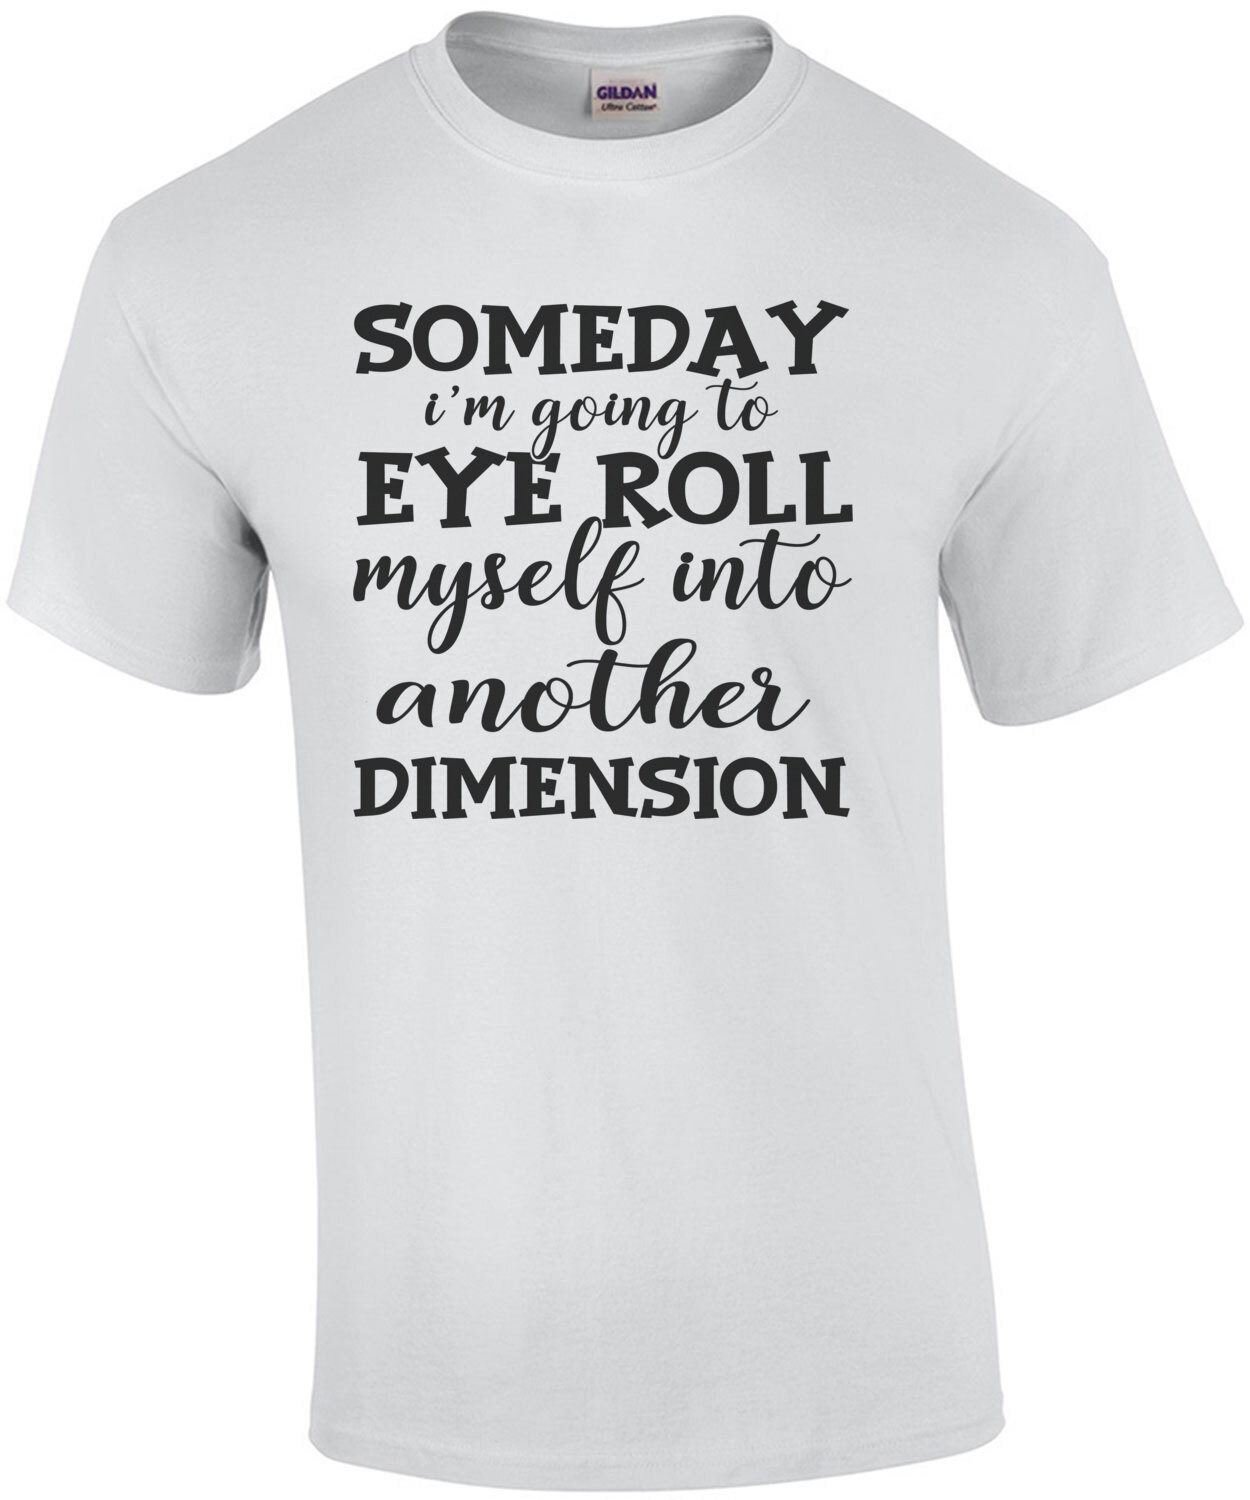 Someday I'm going to eye roll myself into another dimension - funny sarcastic t-shirt